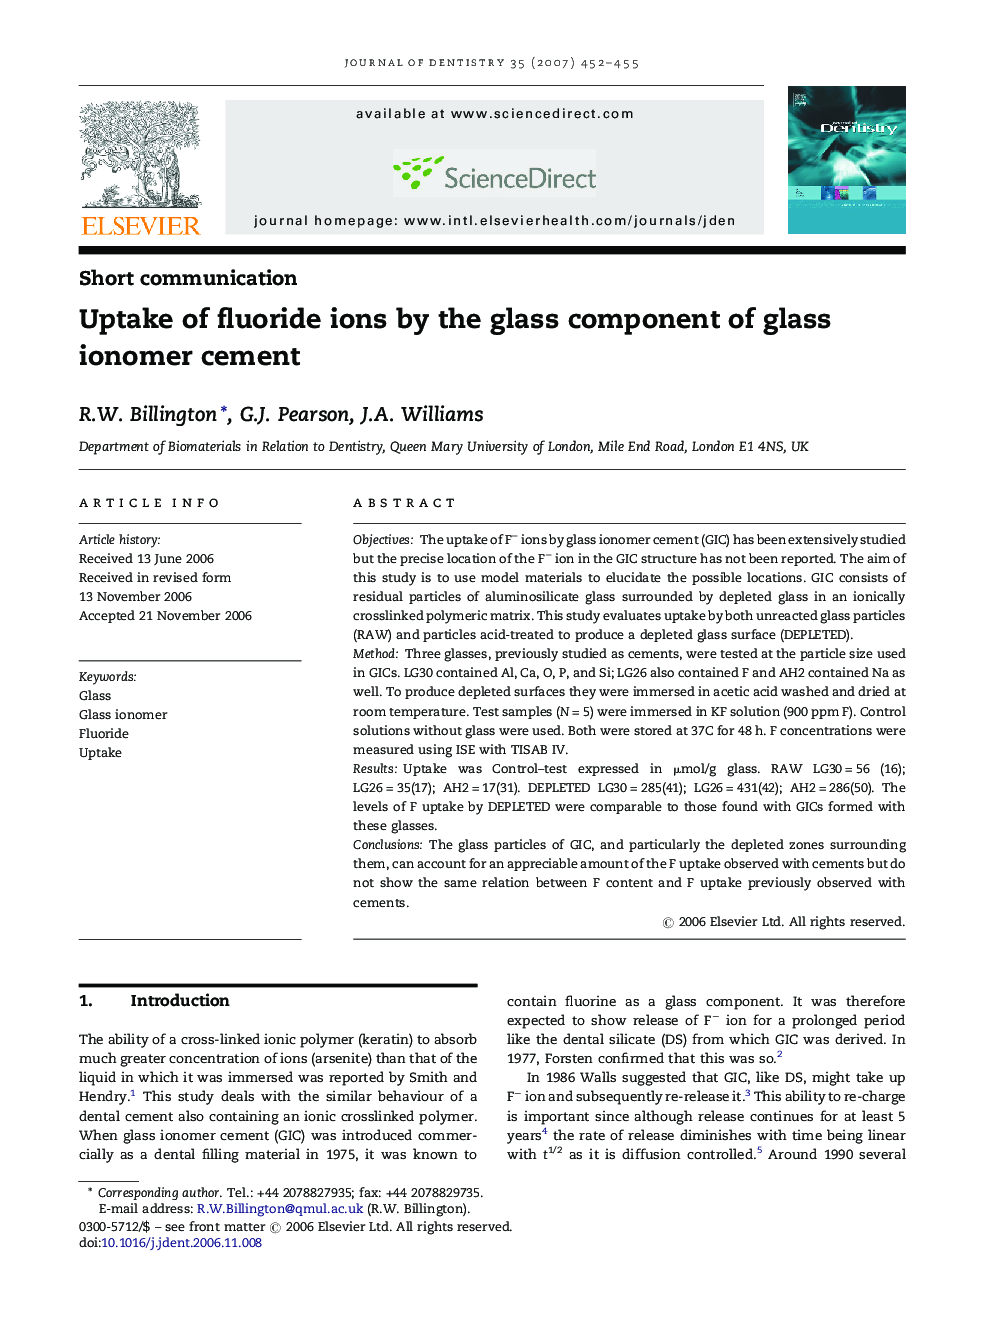 Uptake of fluoride ions by the glass component of glass ionomer cement